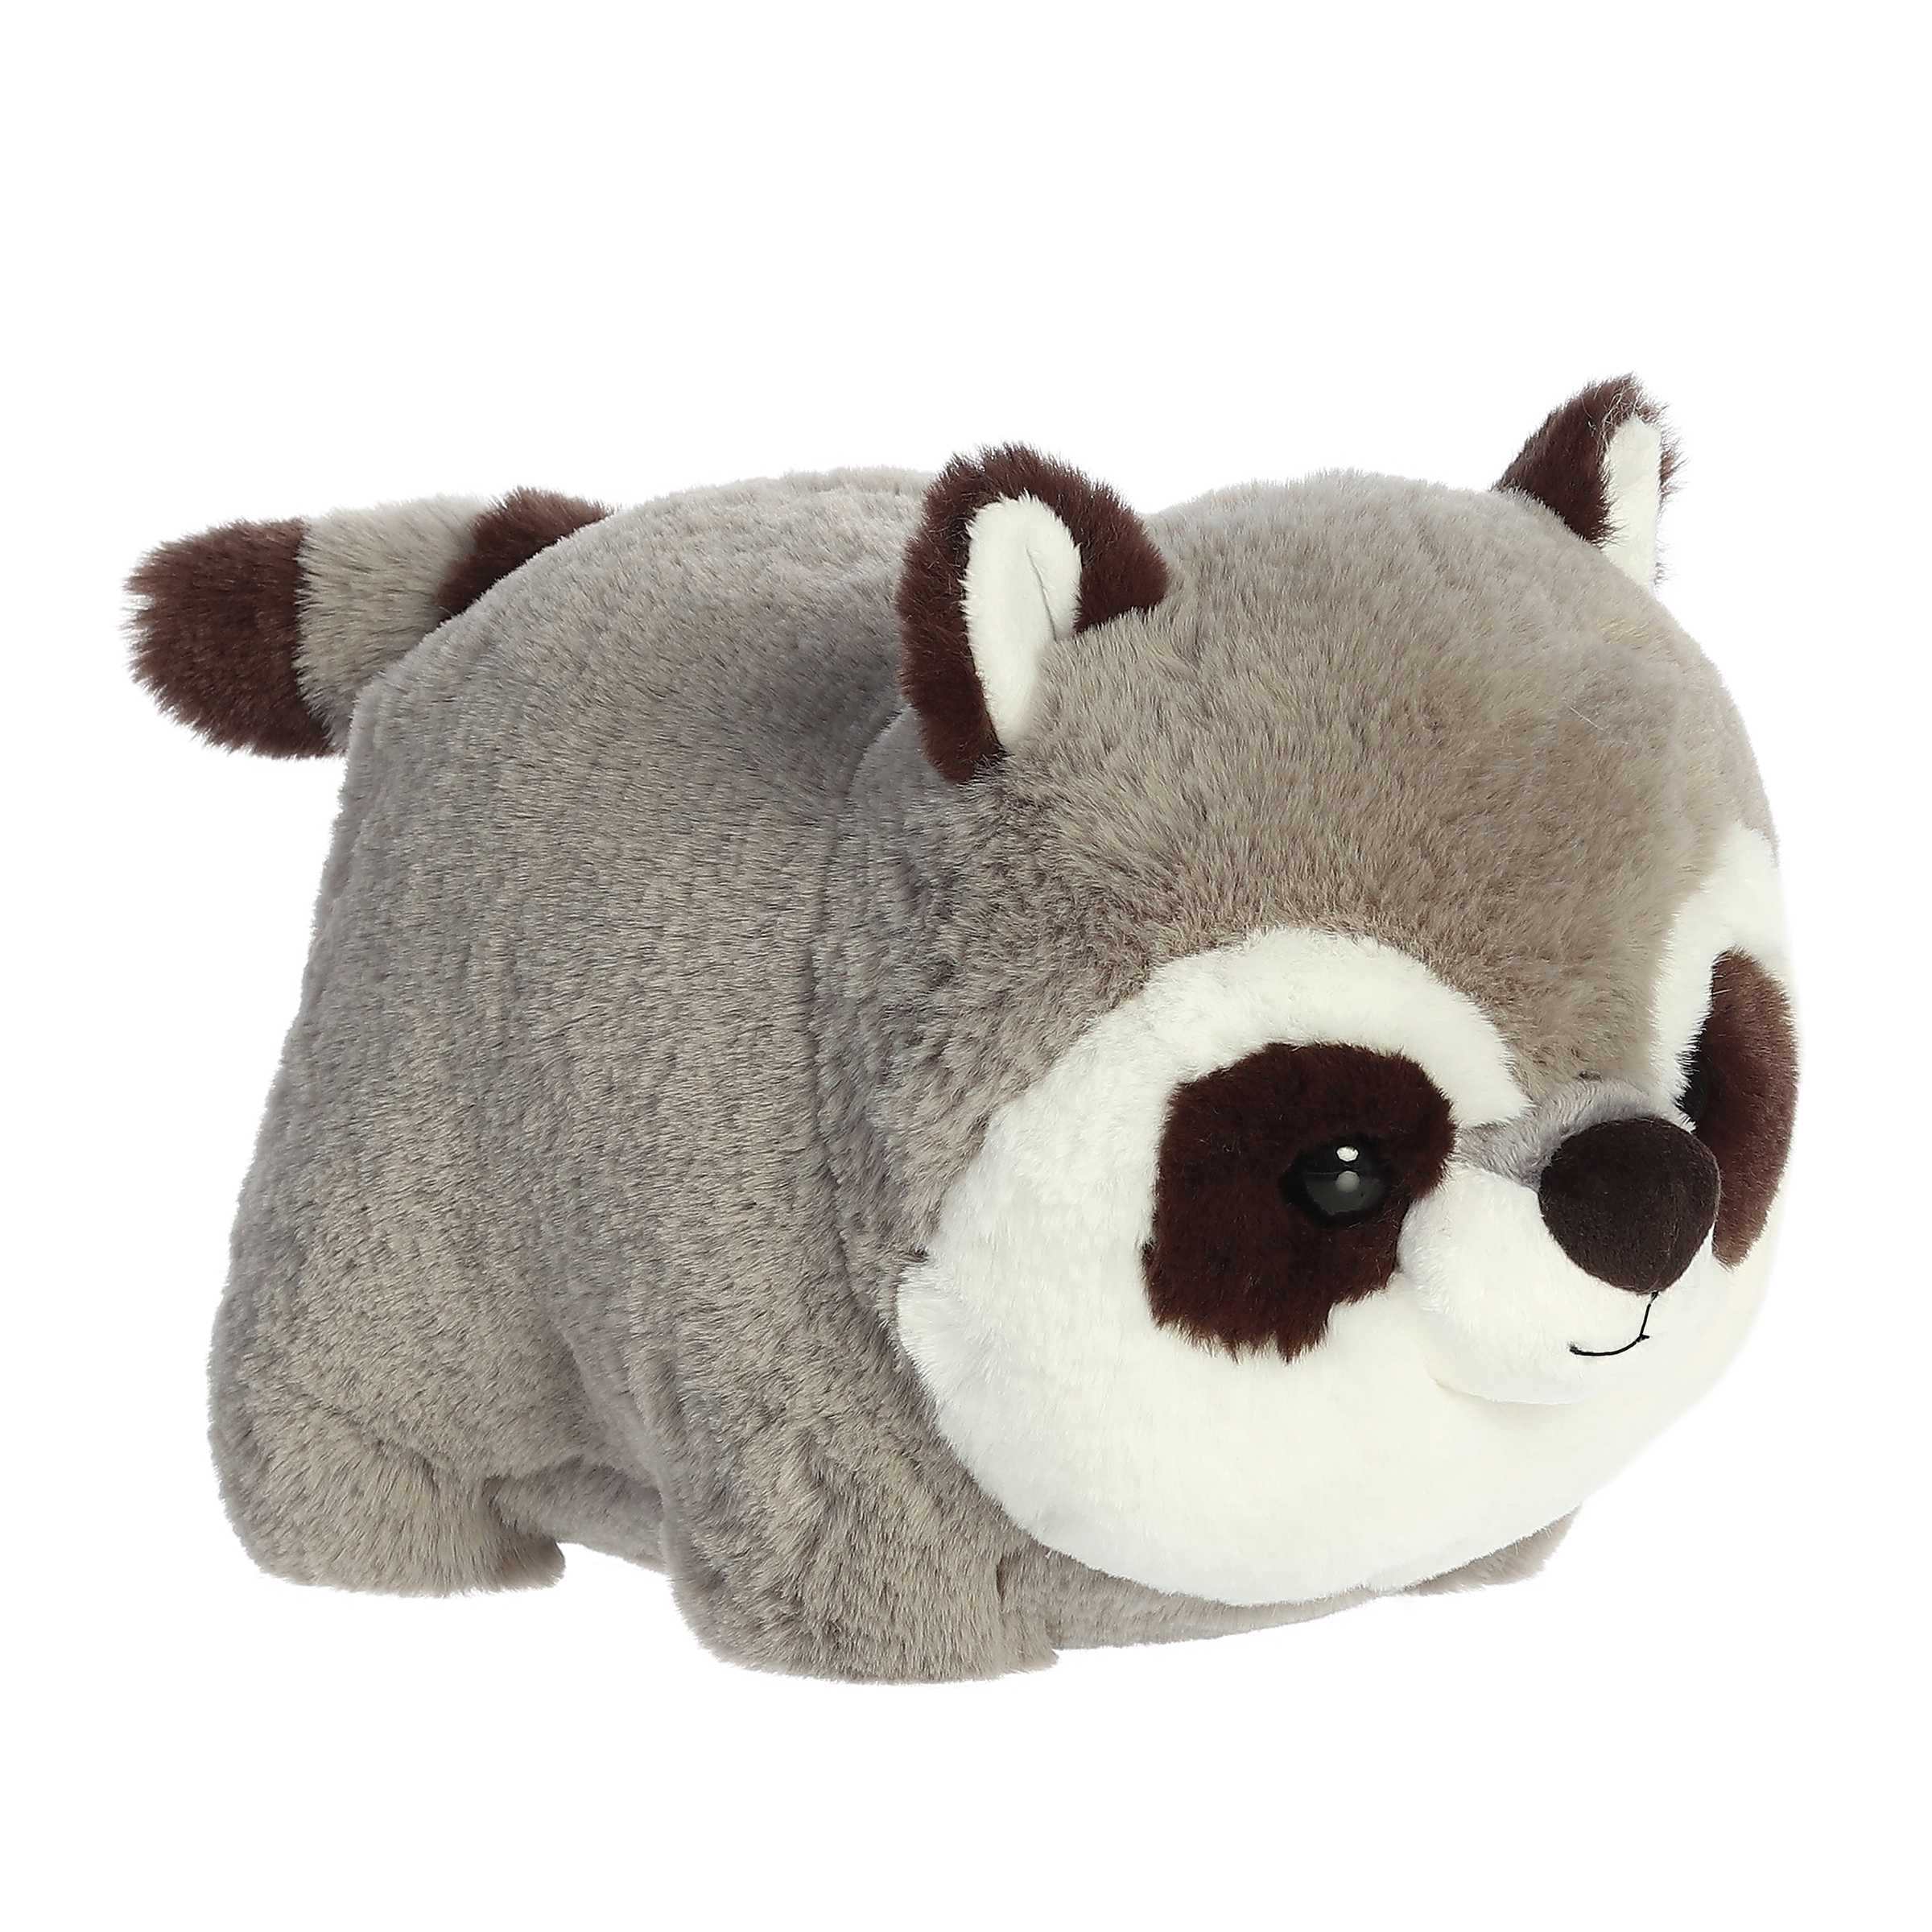 Rory Raccoon from Spudsters, blending cuddliness with a sly charm, crafted from premium materials